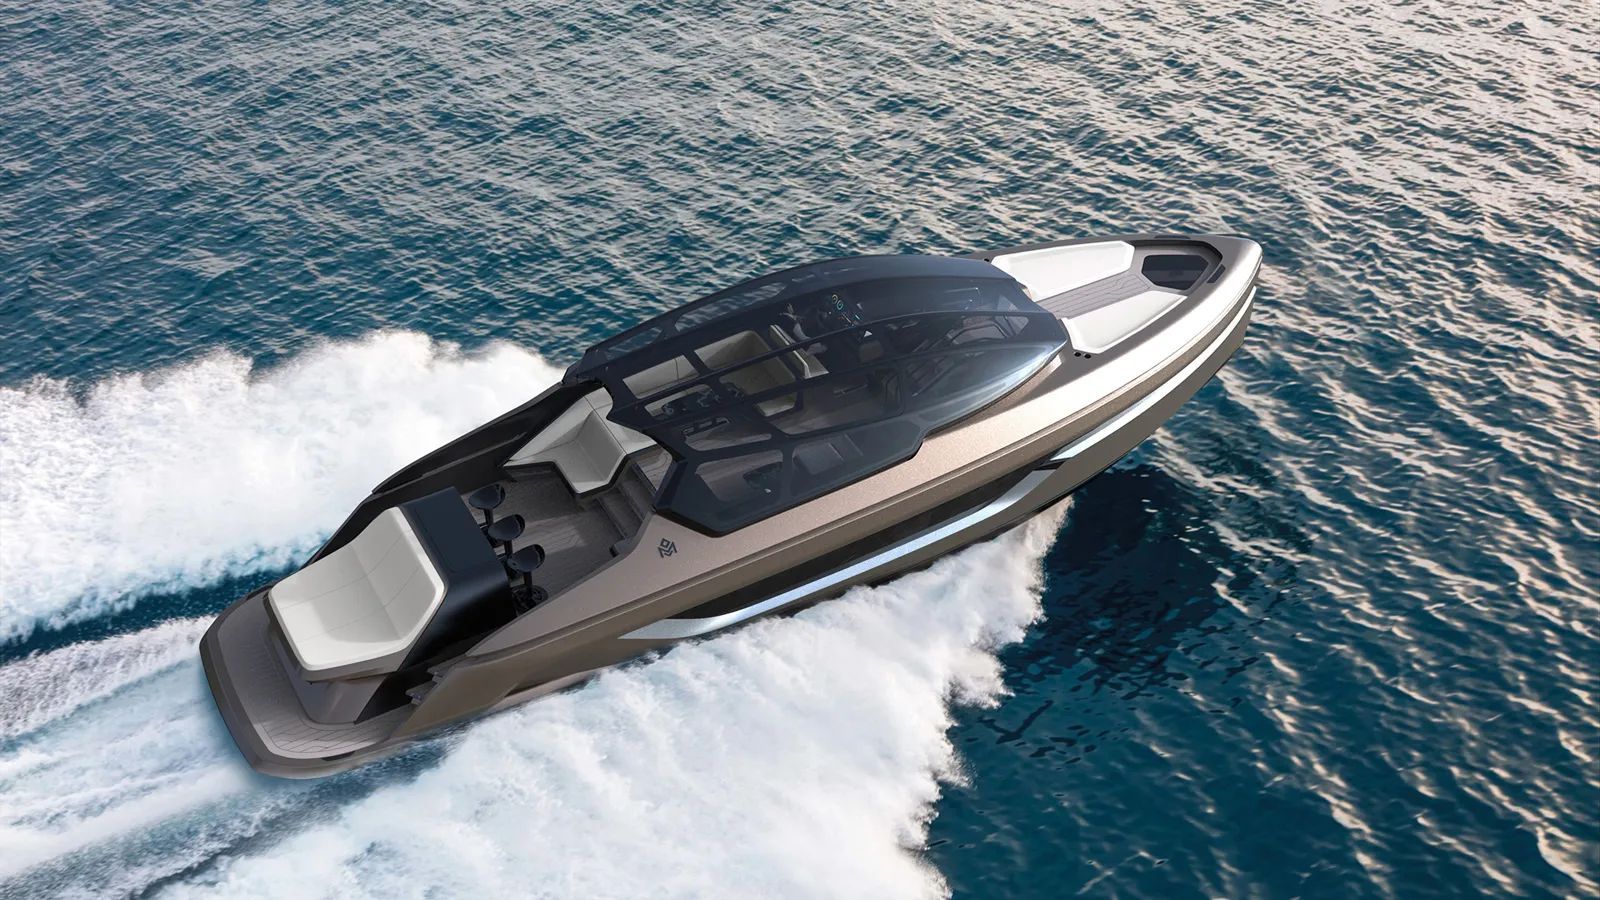 Dubai based shipyard has unveiled a sleek, stylish, and stealthy 55-foot yacht concept, crafted from carbon fiber and titanium, and featuring a glass dome inspired by the structure of bird bones.